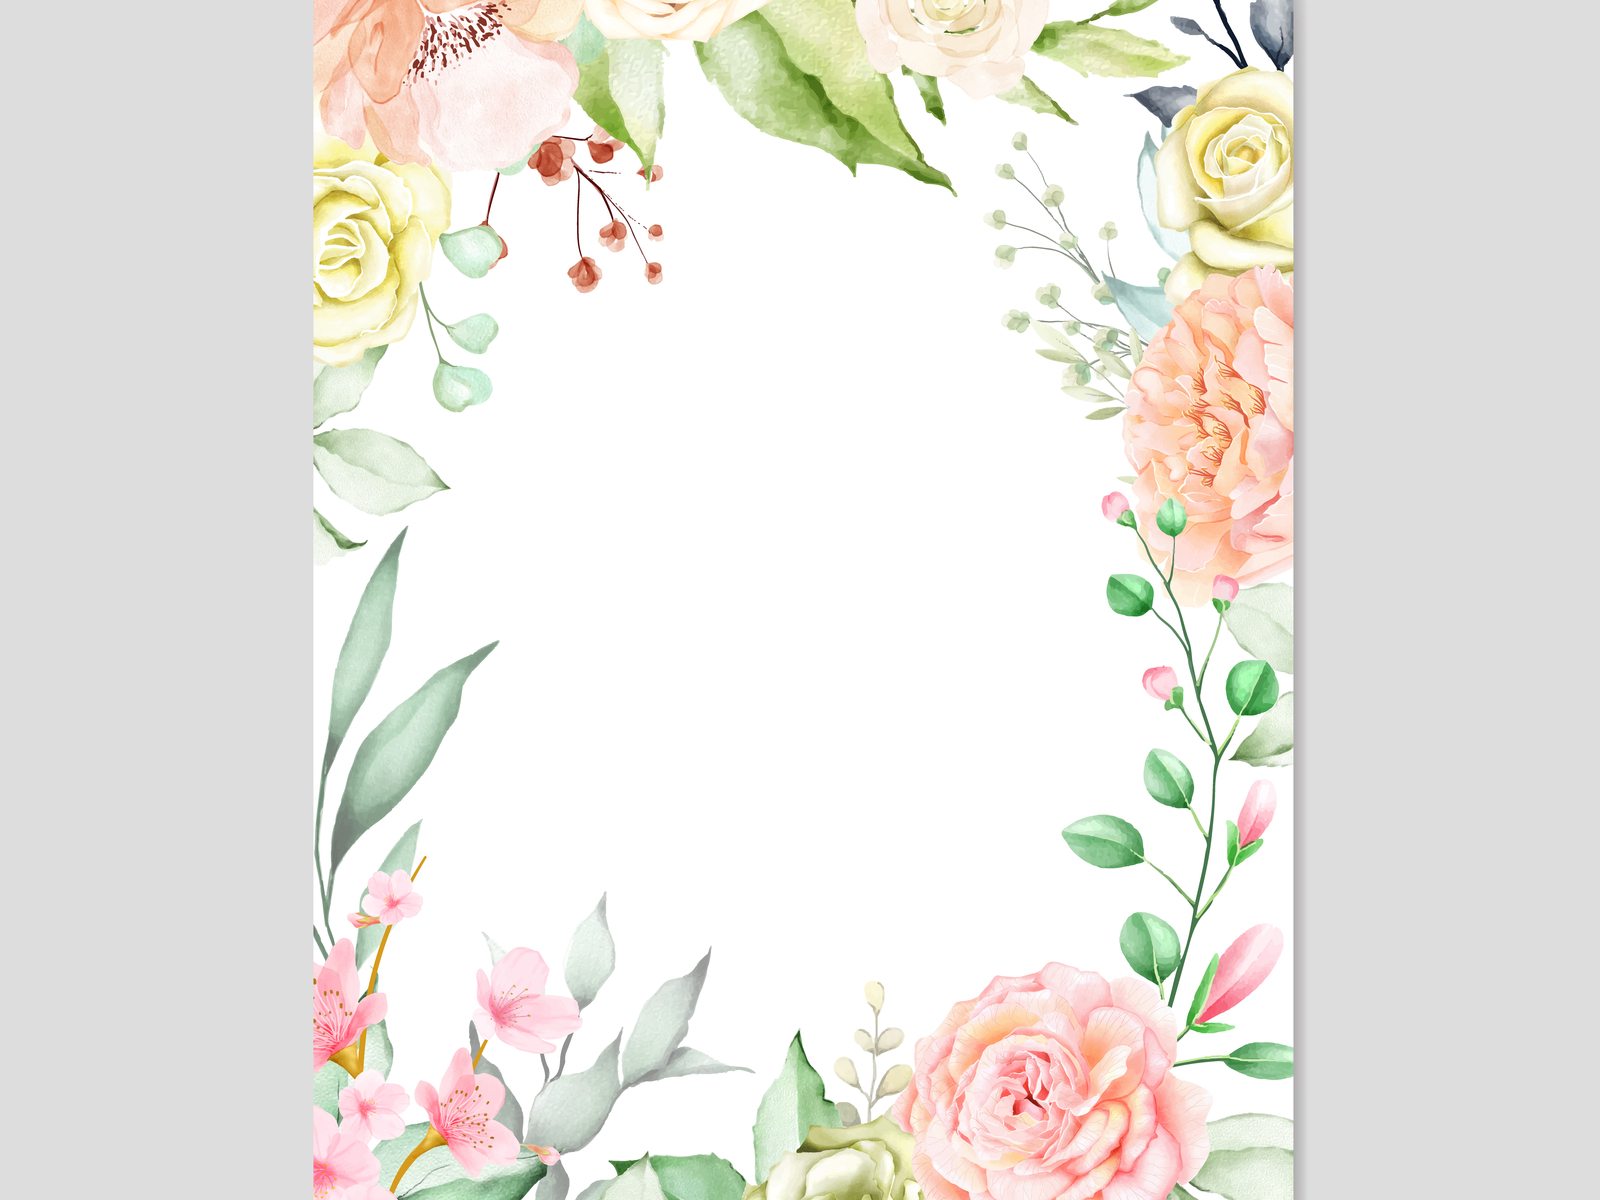  Watercolor  Floral  Frame  Multi Purpose Background by 